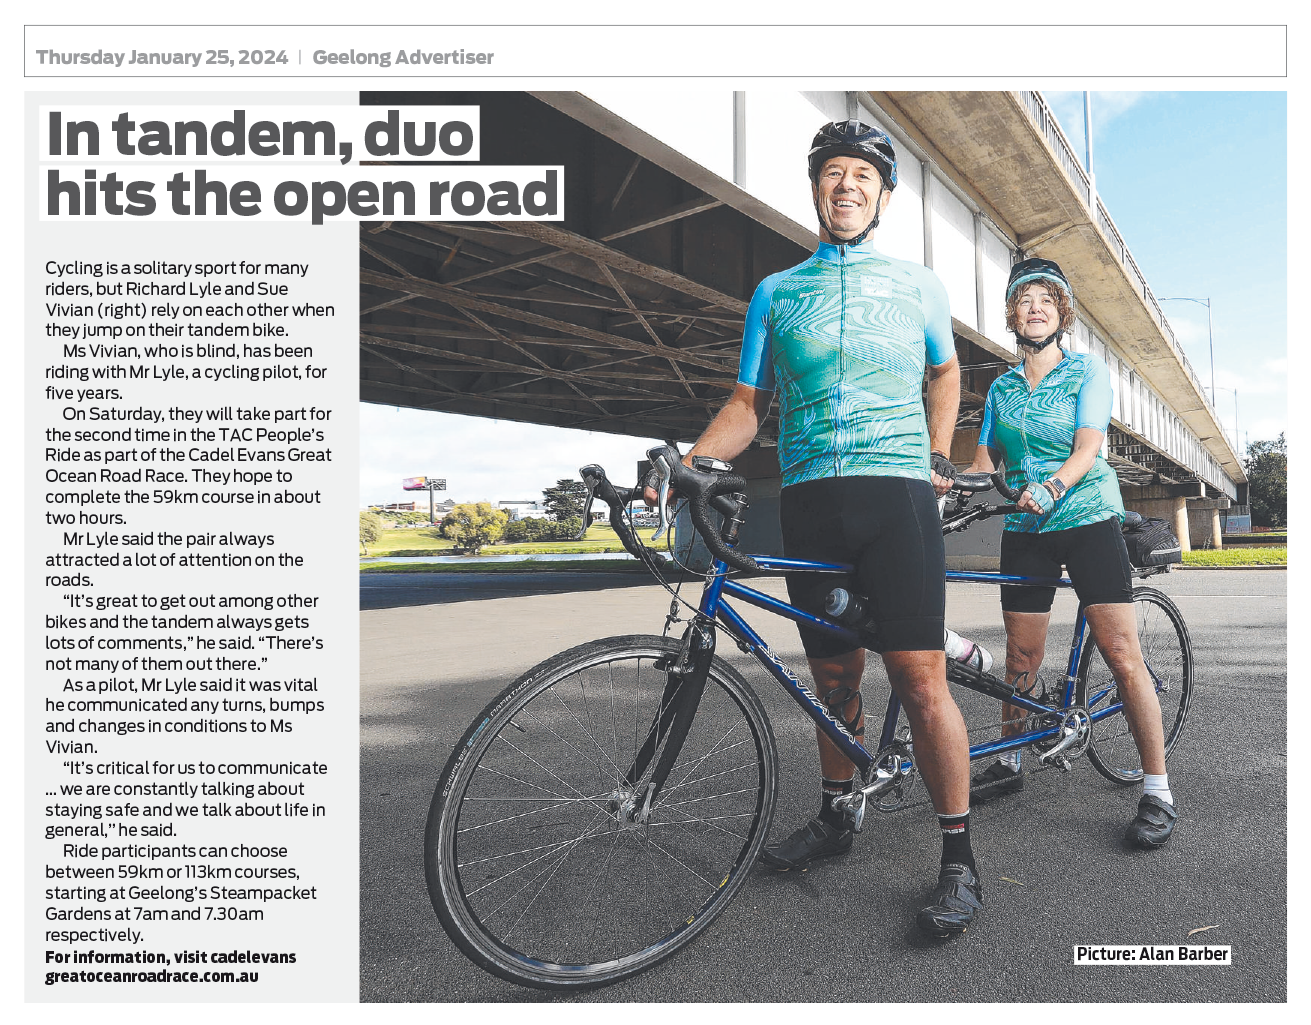 A newspaper clipping with text and an image of Rich and Sue on their stationary tandem bike, both with their feet on the ground. They are at the side of a wide road with a road bridge above and behind them. They are both smiling.